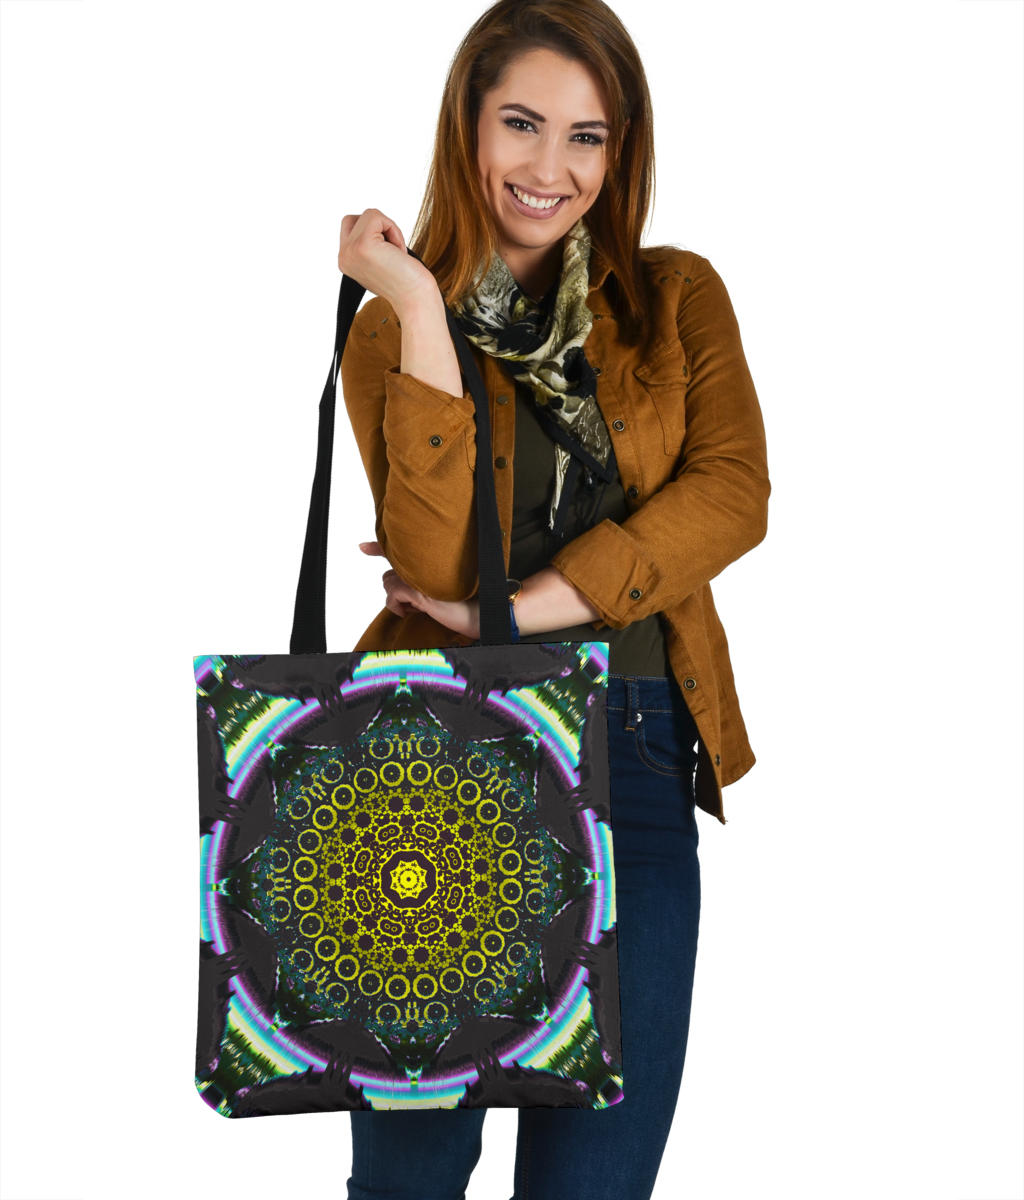 Variations on a Star: 10 | Tote Bag | Makroverset